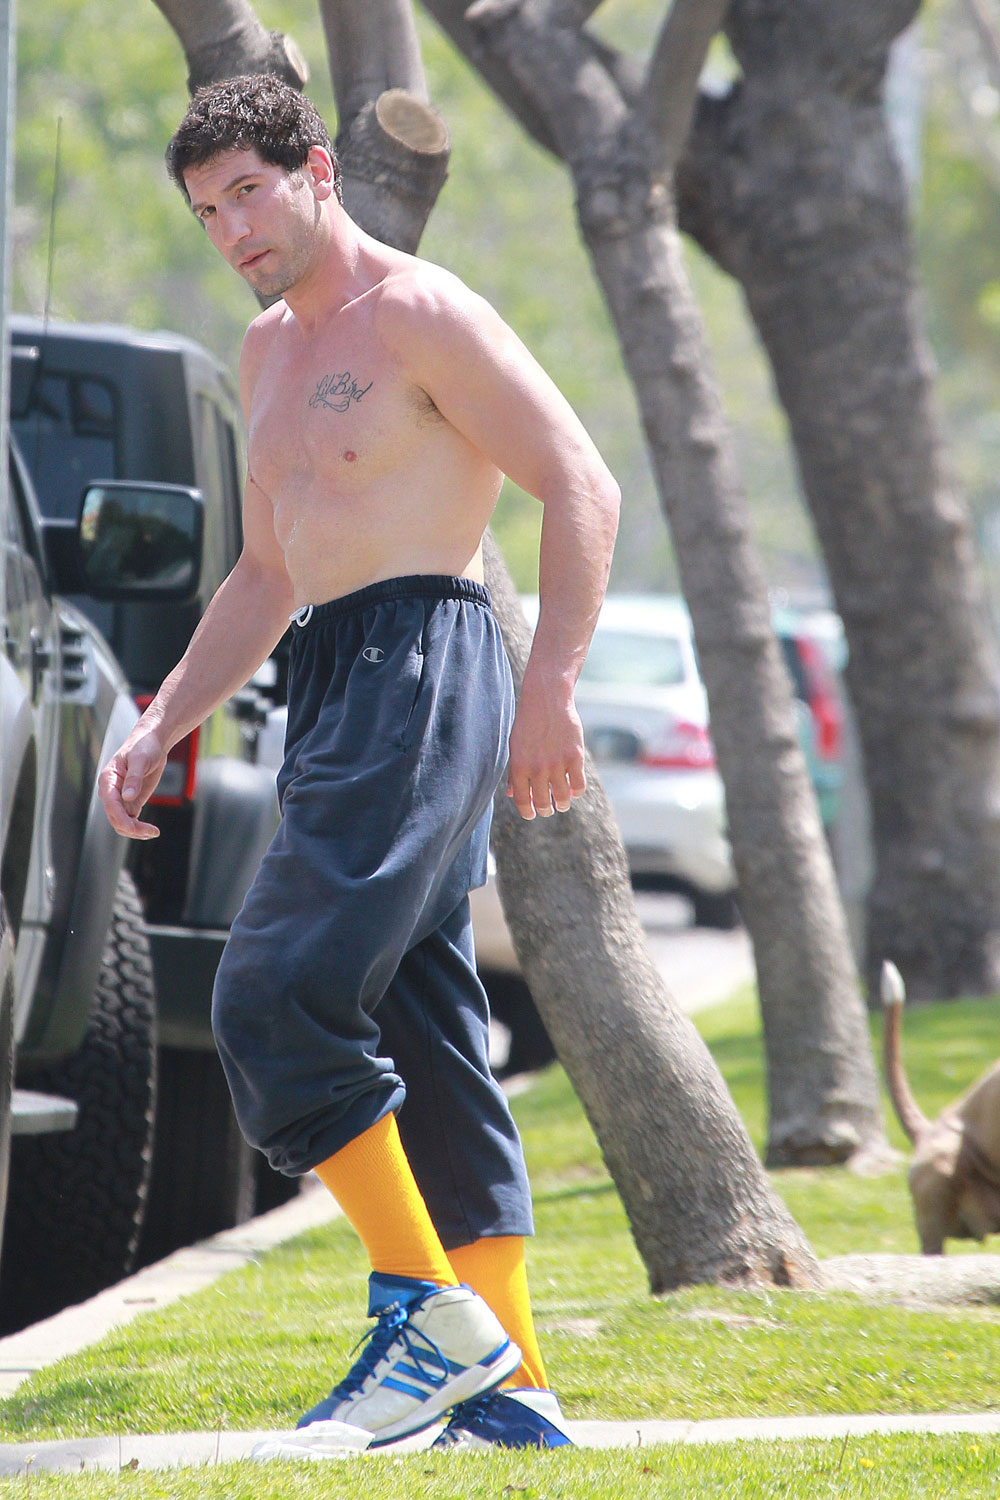 Jon Bernthal shirtless, shaved and with bright yellow socks: would you hit ...